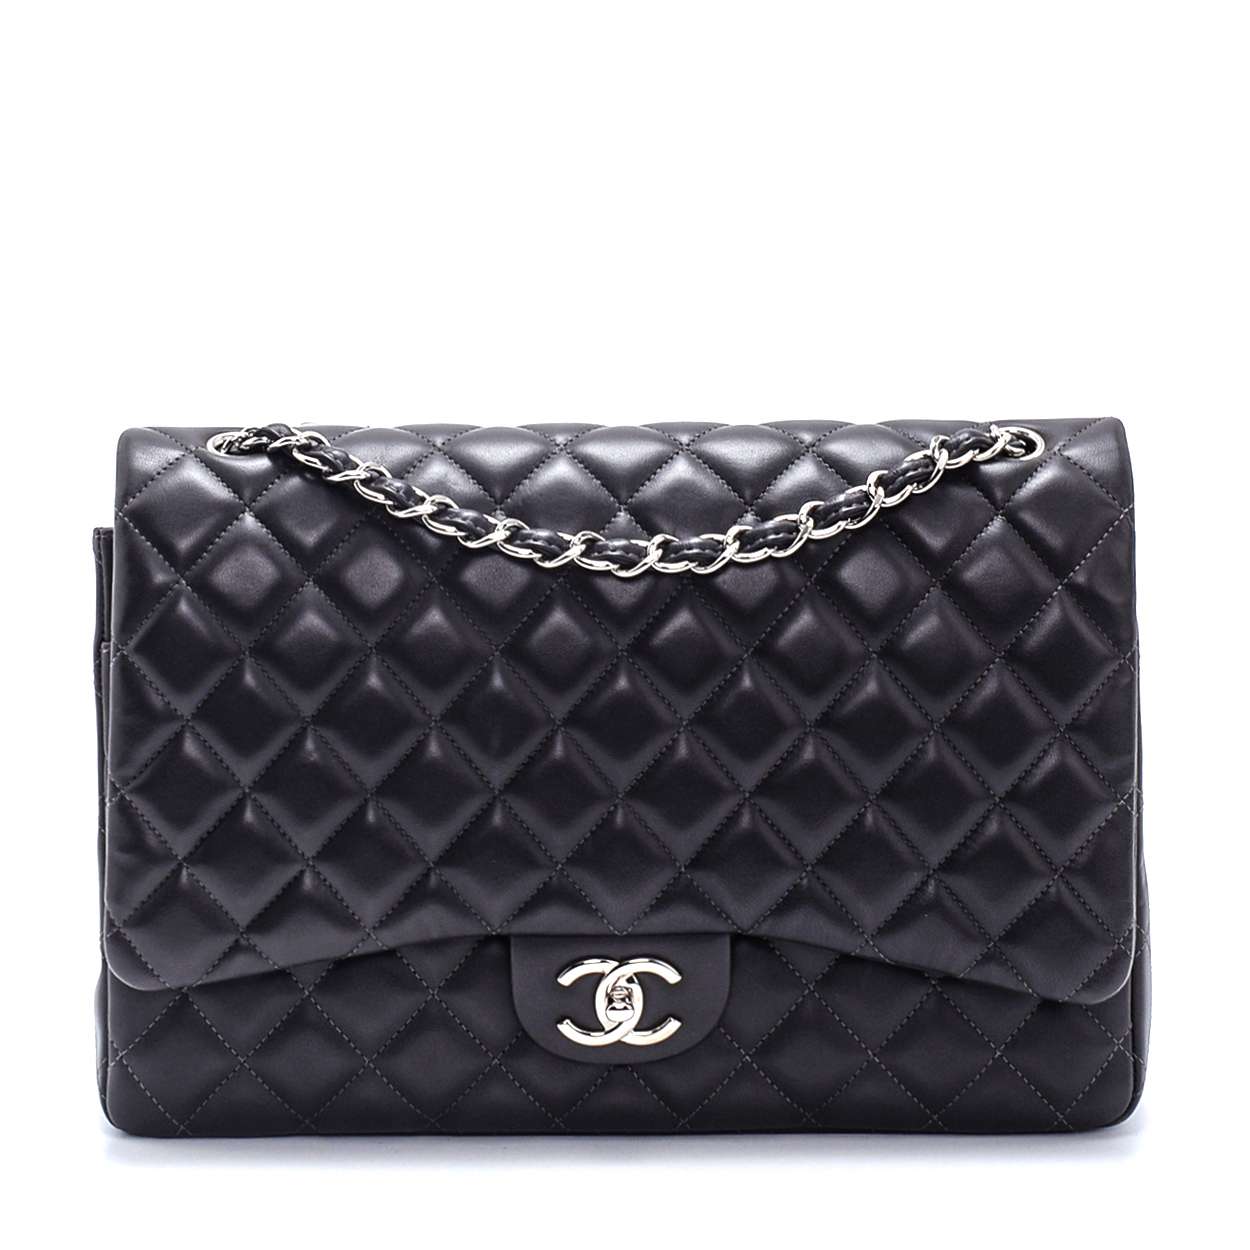 Chanel - Anthracite Quilted Lambskin Leather Maxi Jumbo Double Flap Bag